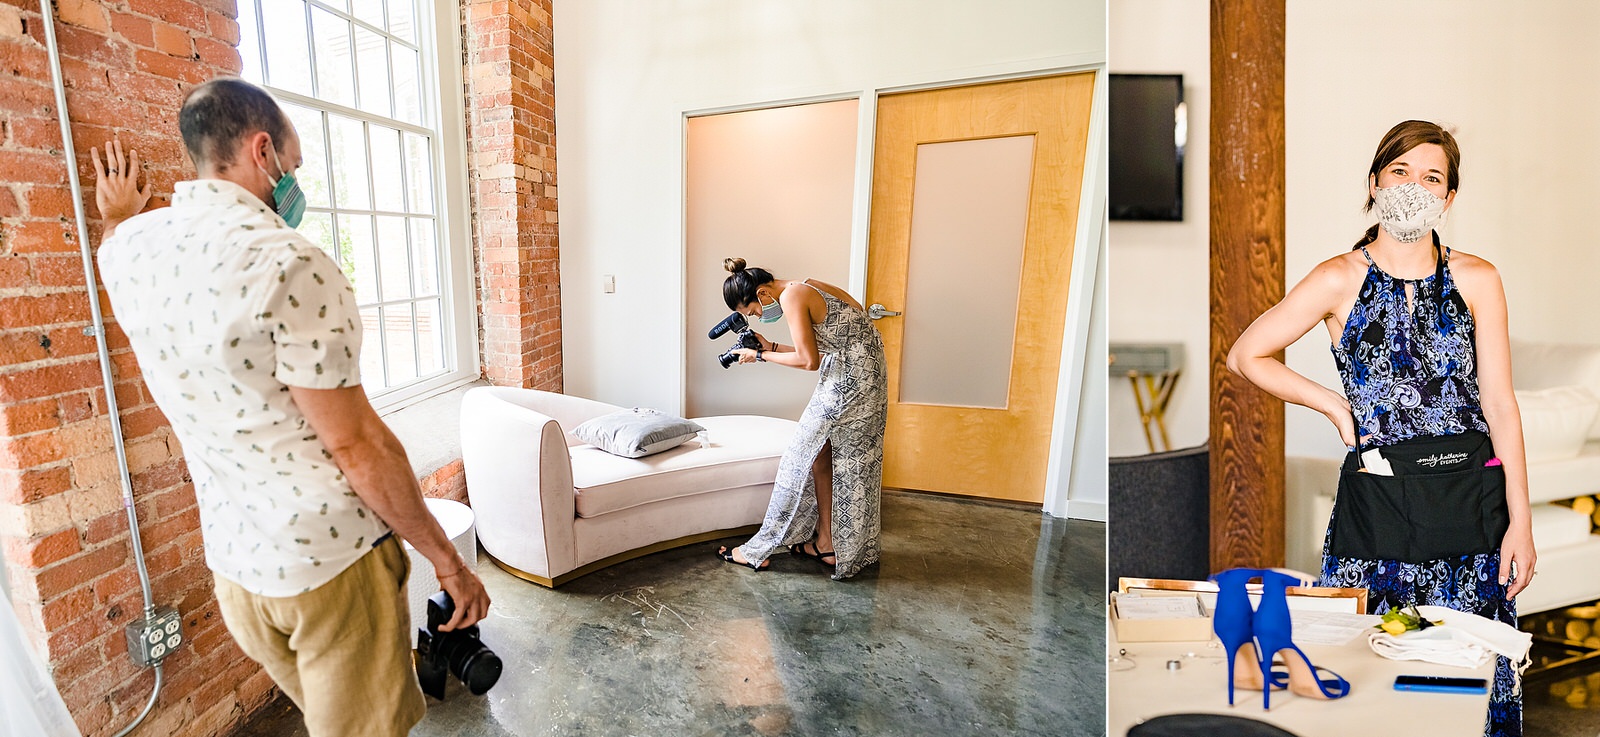 Jon and Zara from Jon Warlick Media film details during a colorful wedding inspiration shoot